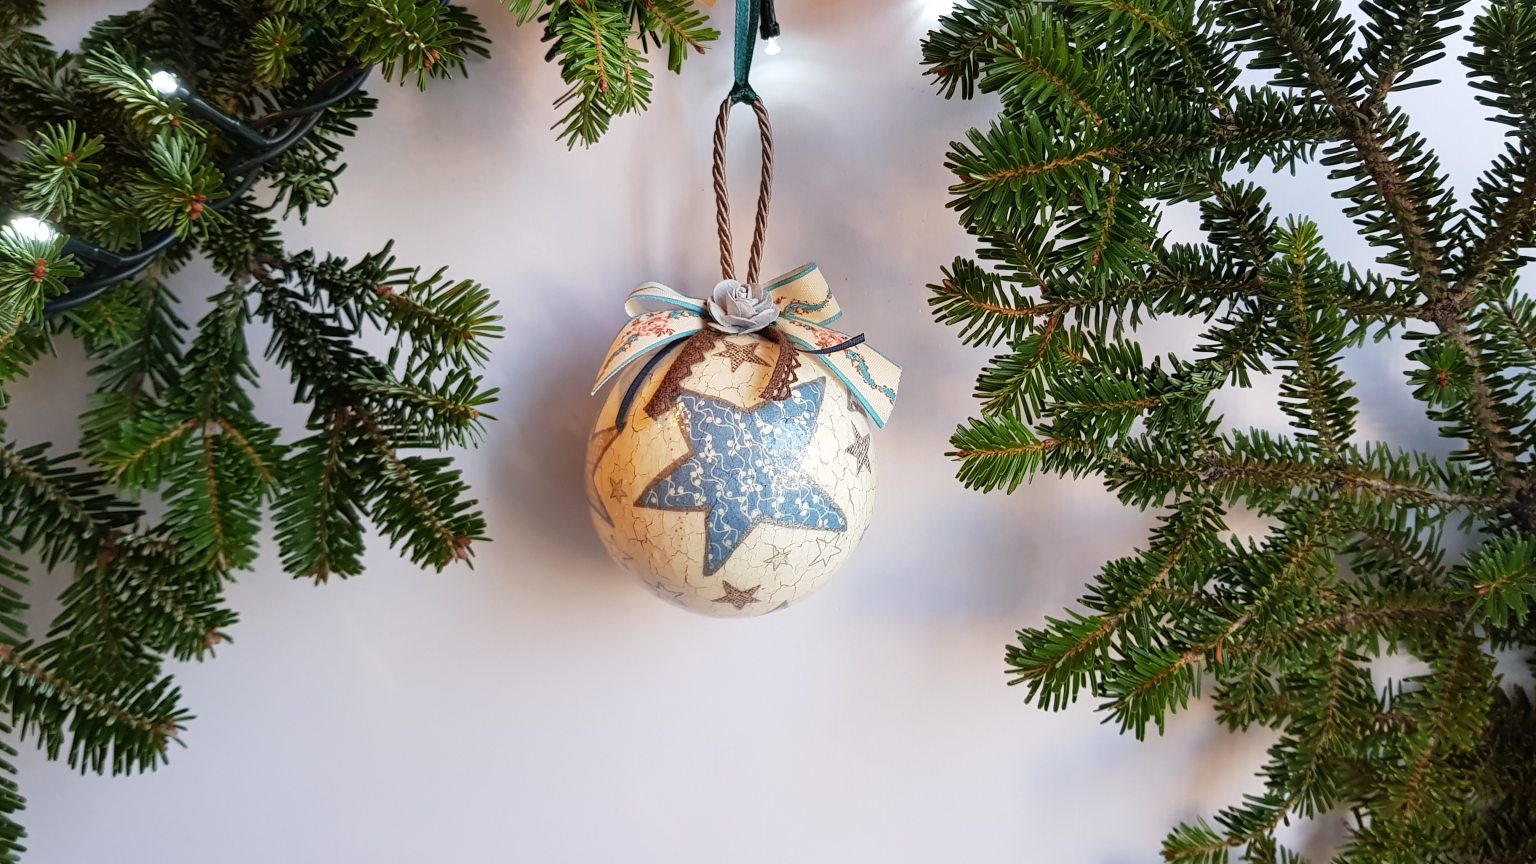 Handmade vintage bauble with stars